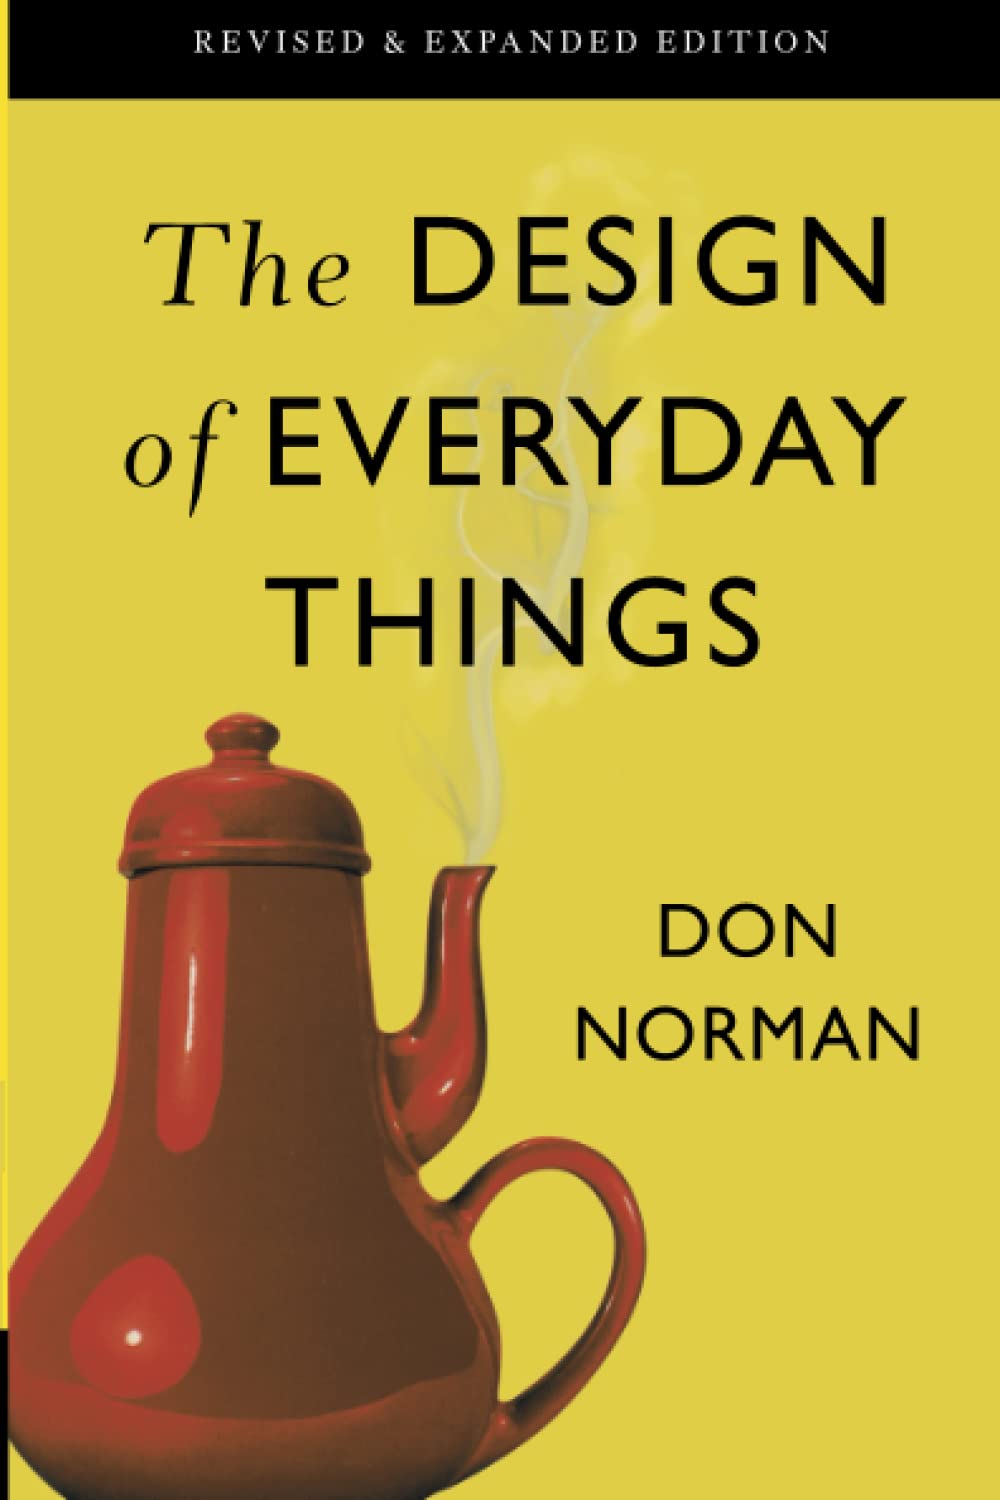 The Design of Everyday Things by Don Norman book cover